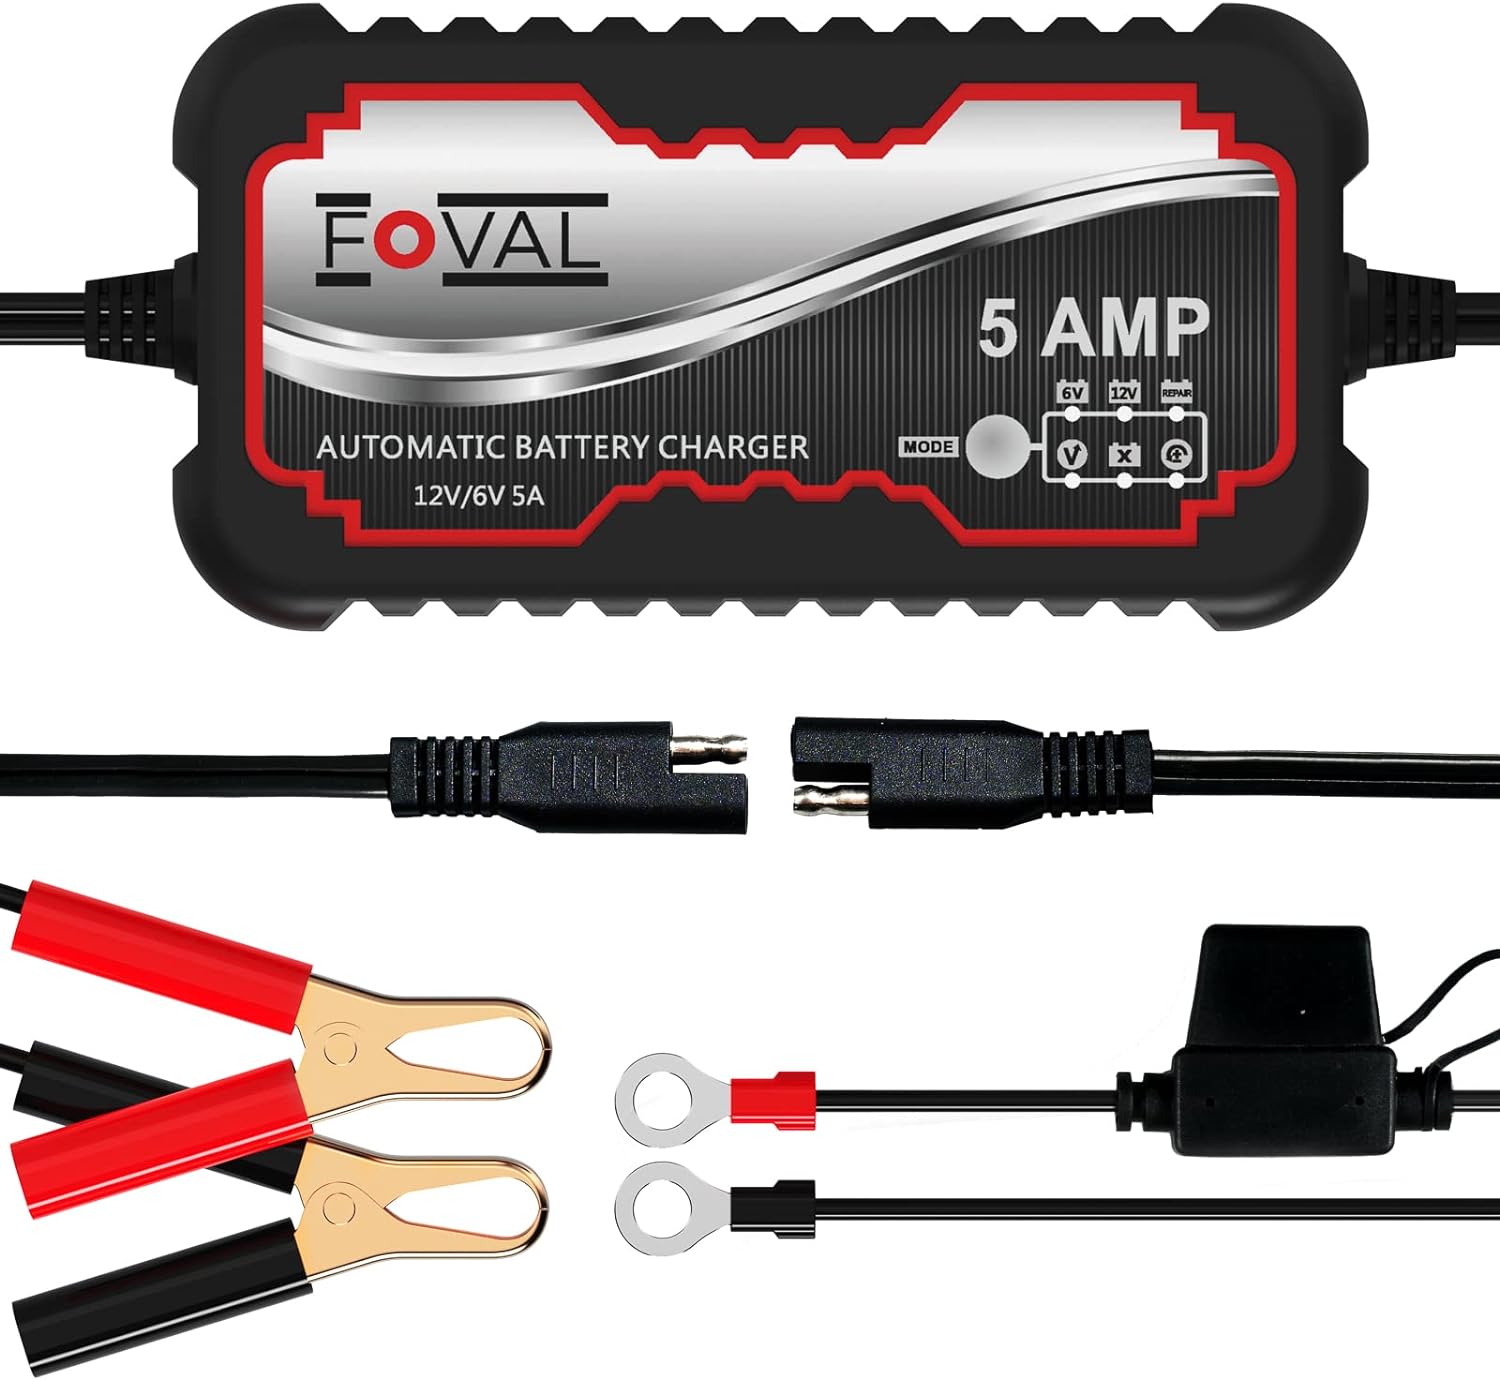 FOVAL 5A Smart Car Battery Charger, 6V and 12V Battery Charger Automotive, Battery Maintainer, Trickle Charger for Motorcycle, Float Charger for Cars, Trucks, SUVs, Boat, Lawn Mower, RV, ATV - FOVAL 5A Smart Car Battery Charger Review